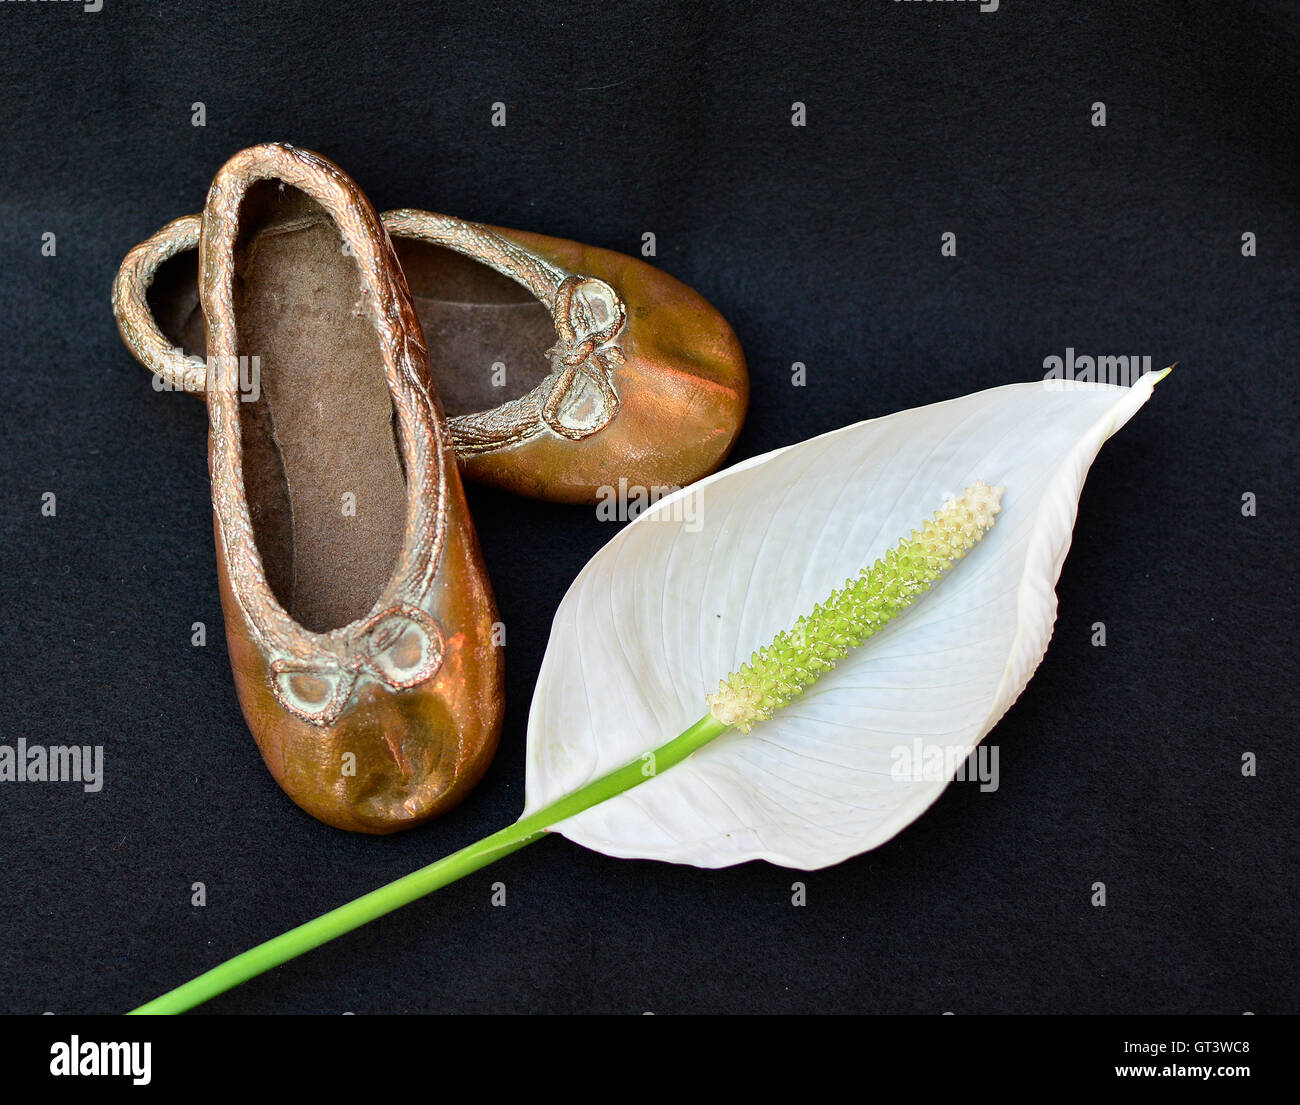 Her first ballet shoes. Copper toddler ballet shoes. Dancing shoes. Baby ballet shoes. With white peace lily. Stock Photo